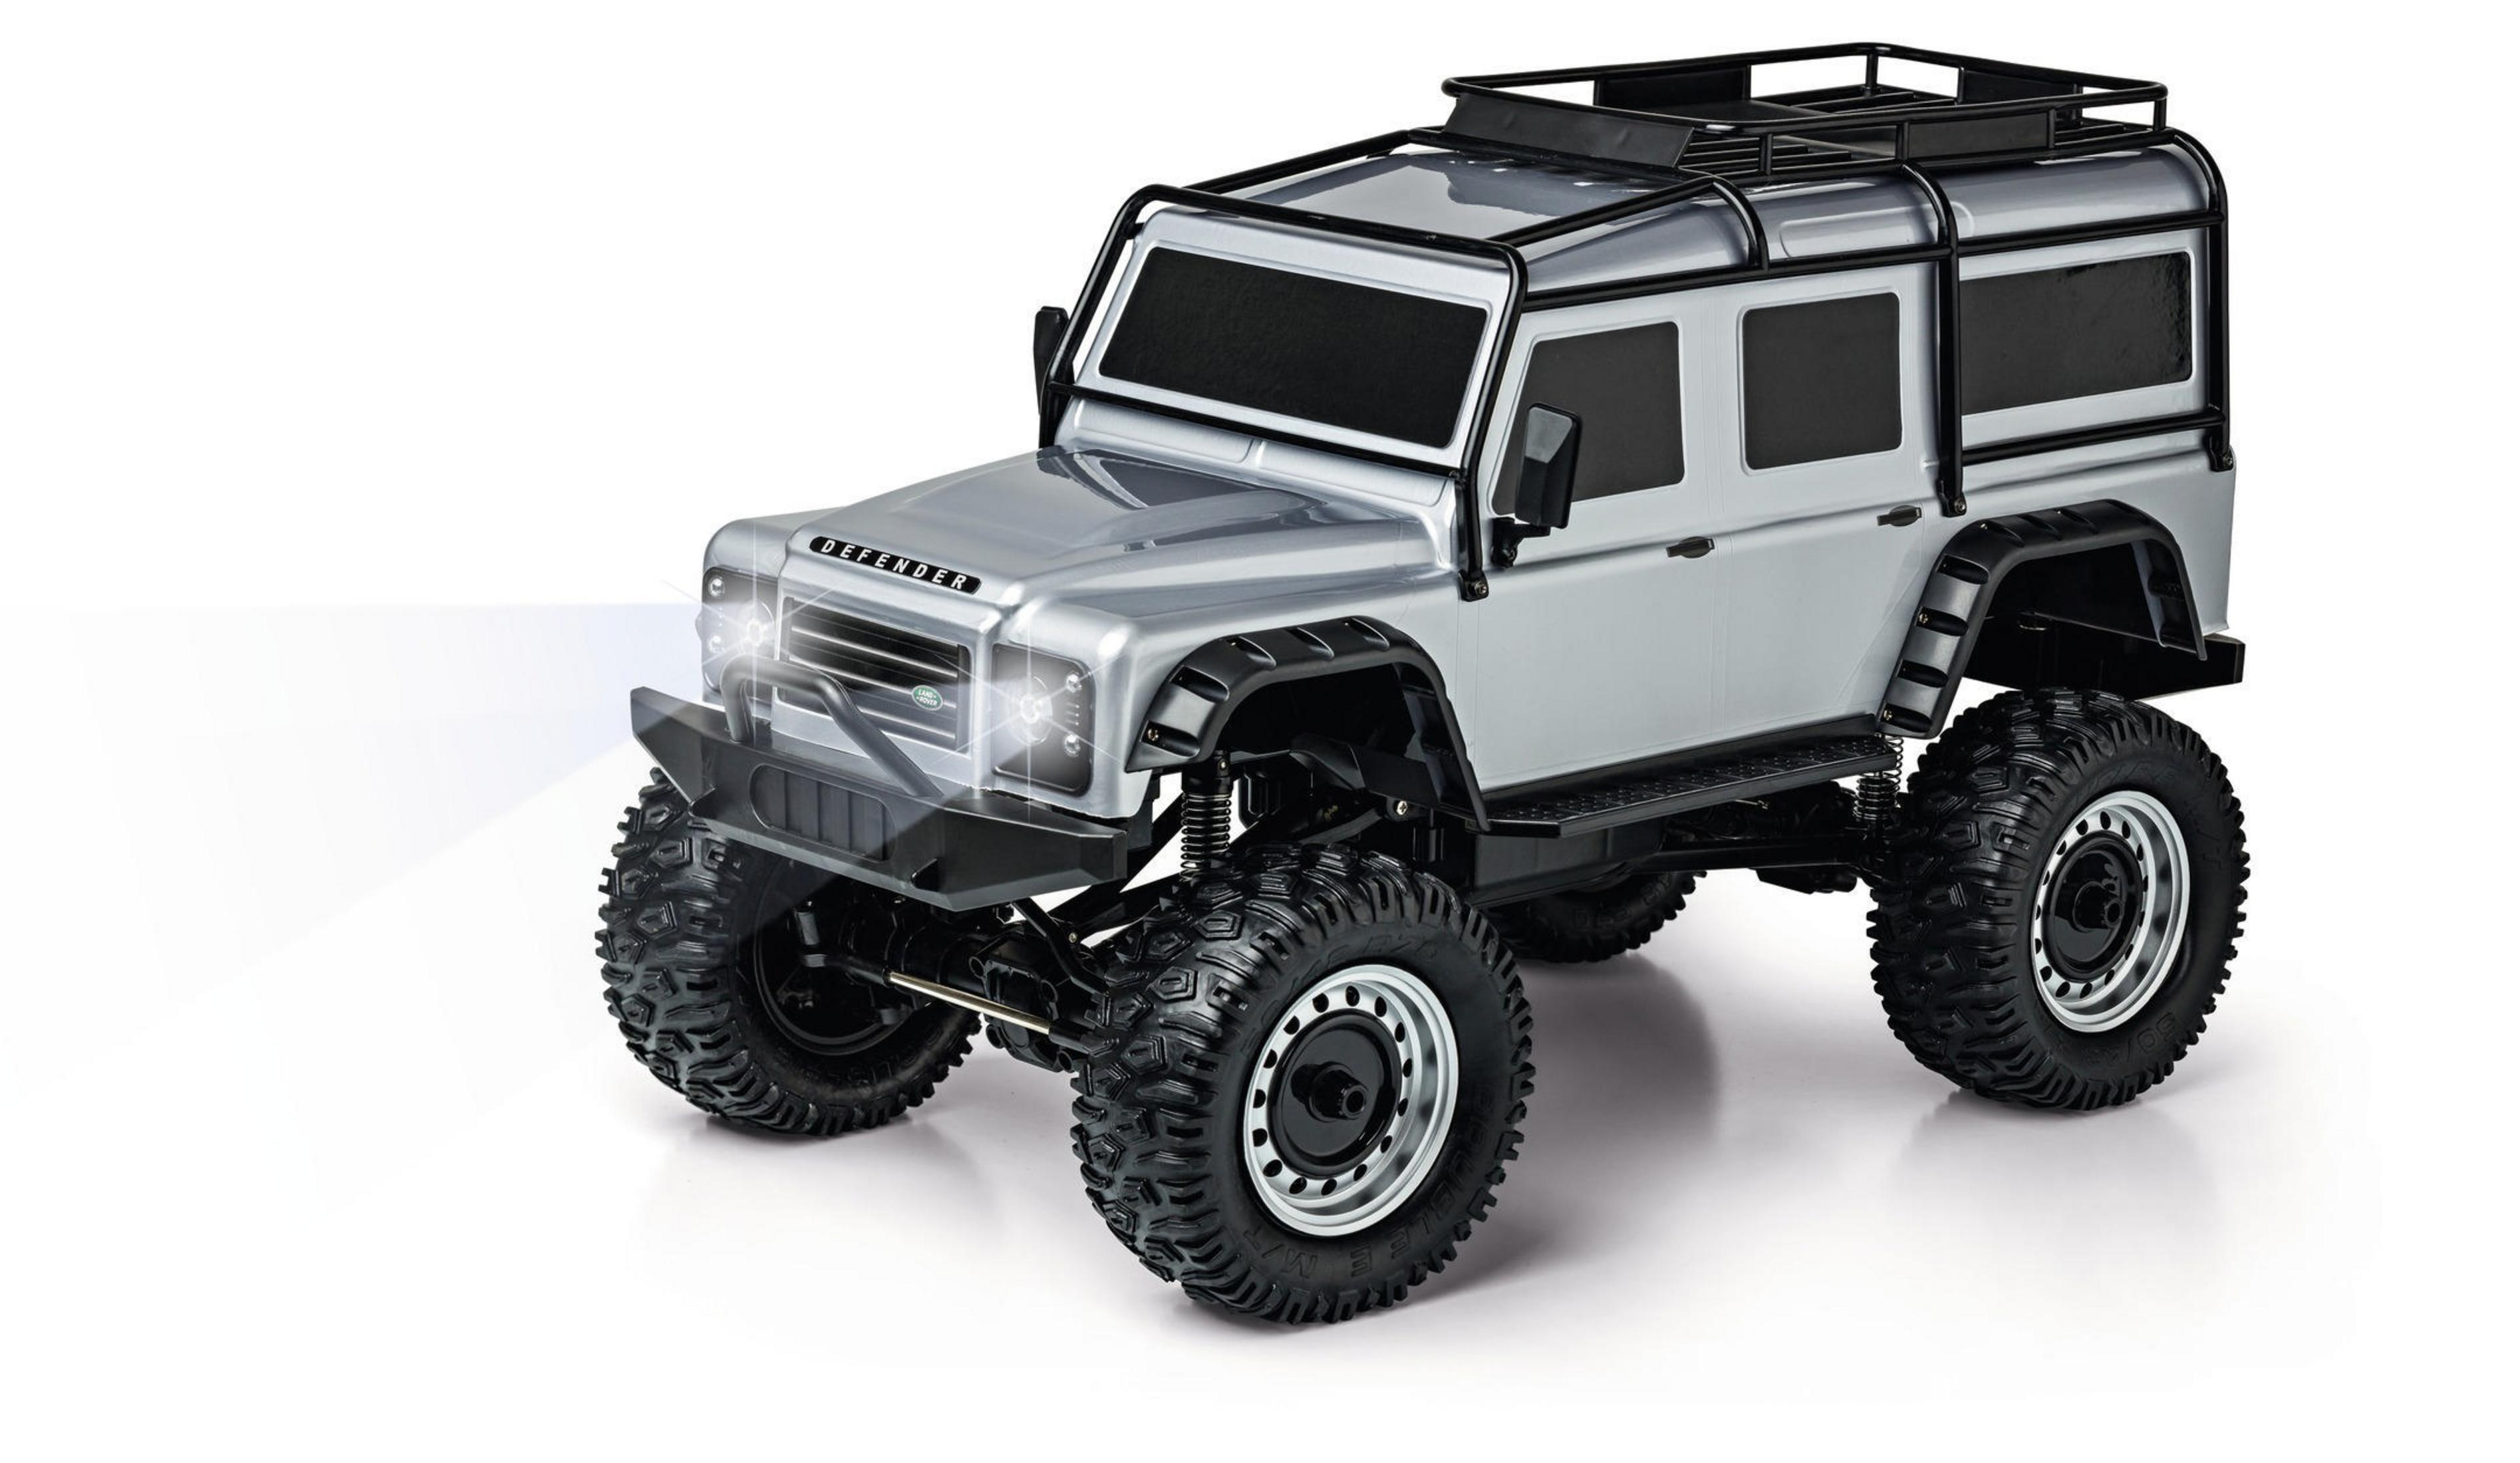 LAND CARSON ROVER Spielzeugmodell, 1:8 SILBER 100% 500404172 RTR Silber DEFENDER